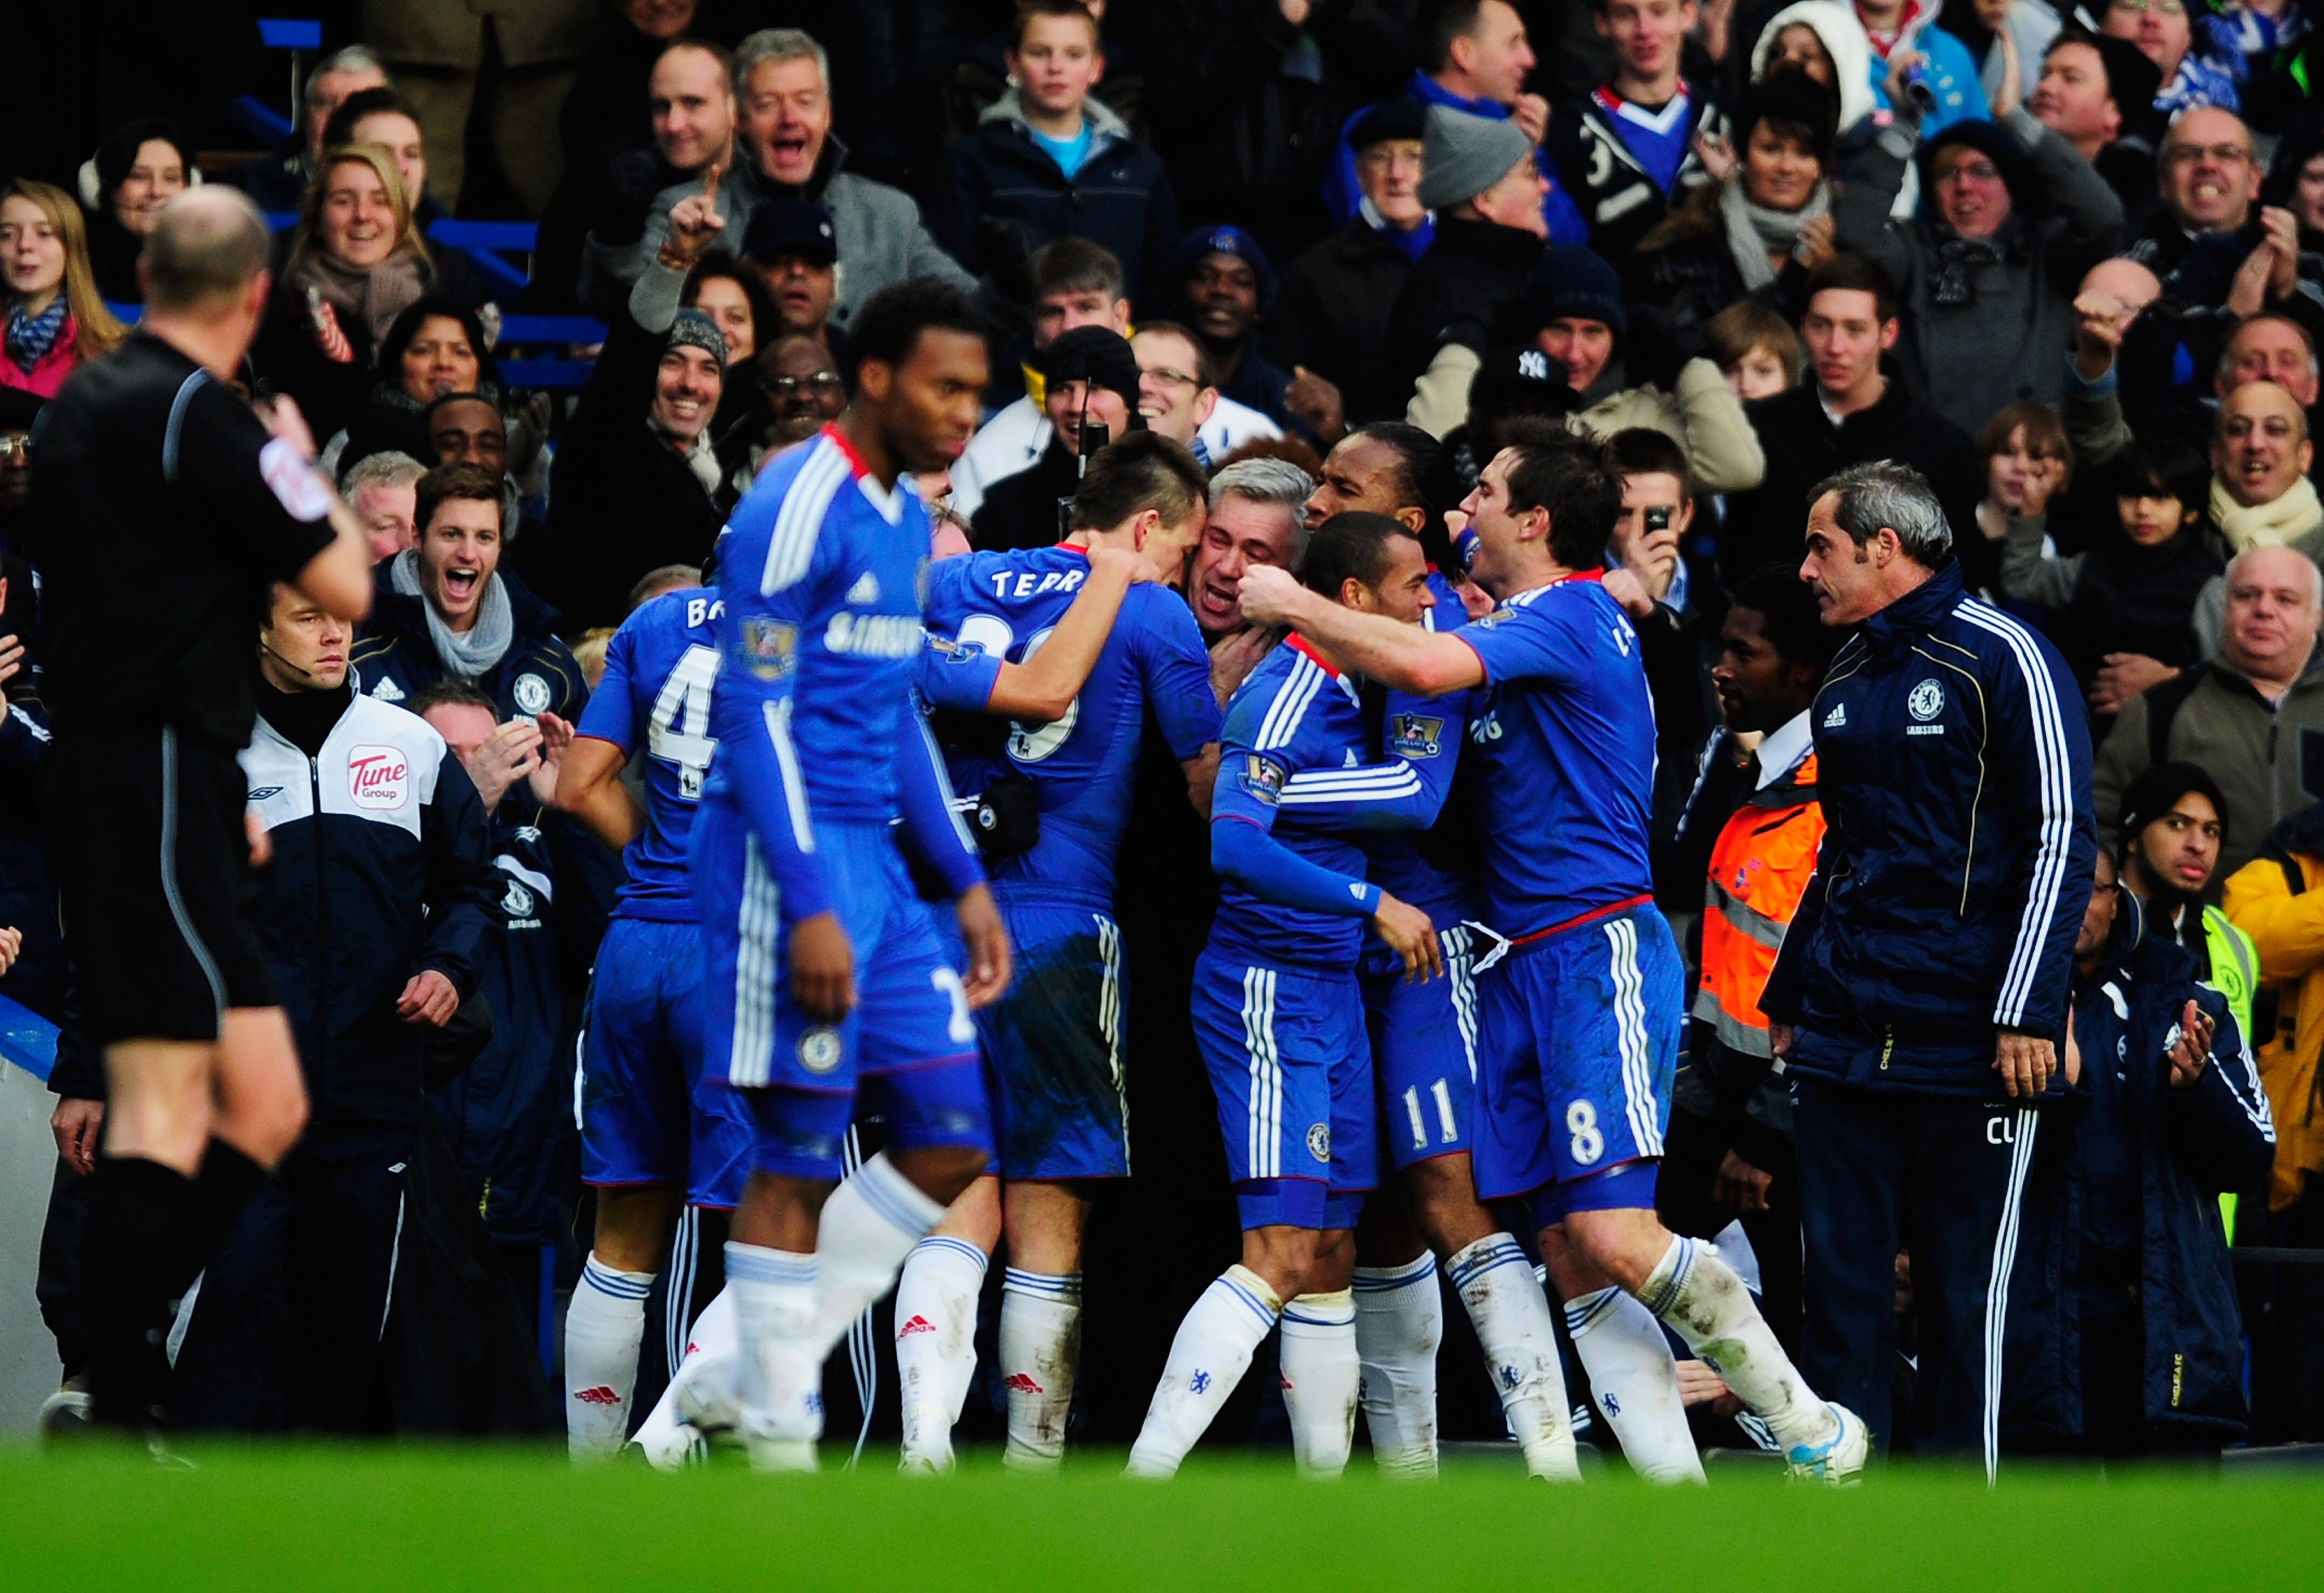 LONDON, ENGLAND - JANUARY 02:  John Terry of Chelsea celebrates with manager Carlo Ancelotti and team mates as he scores their third goal during the Barclays Premier League match between Chelsea and Aston Villa at Stamford Bridge on January 2, 2011 in Lon